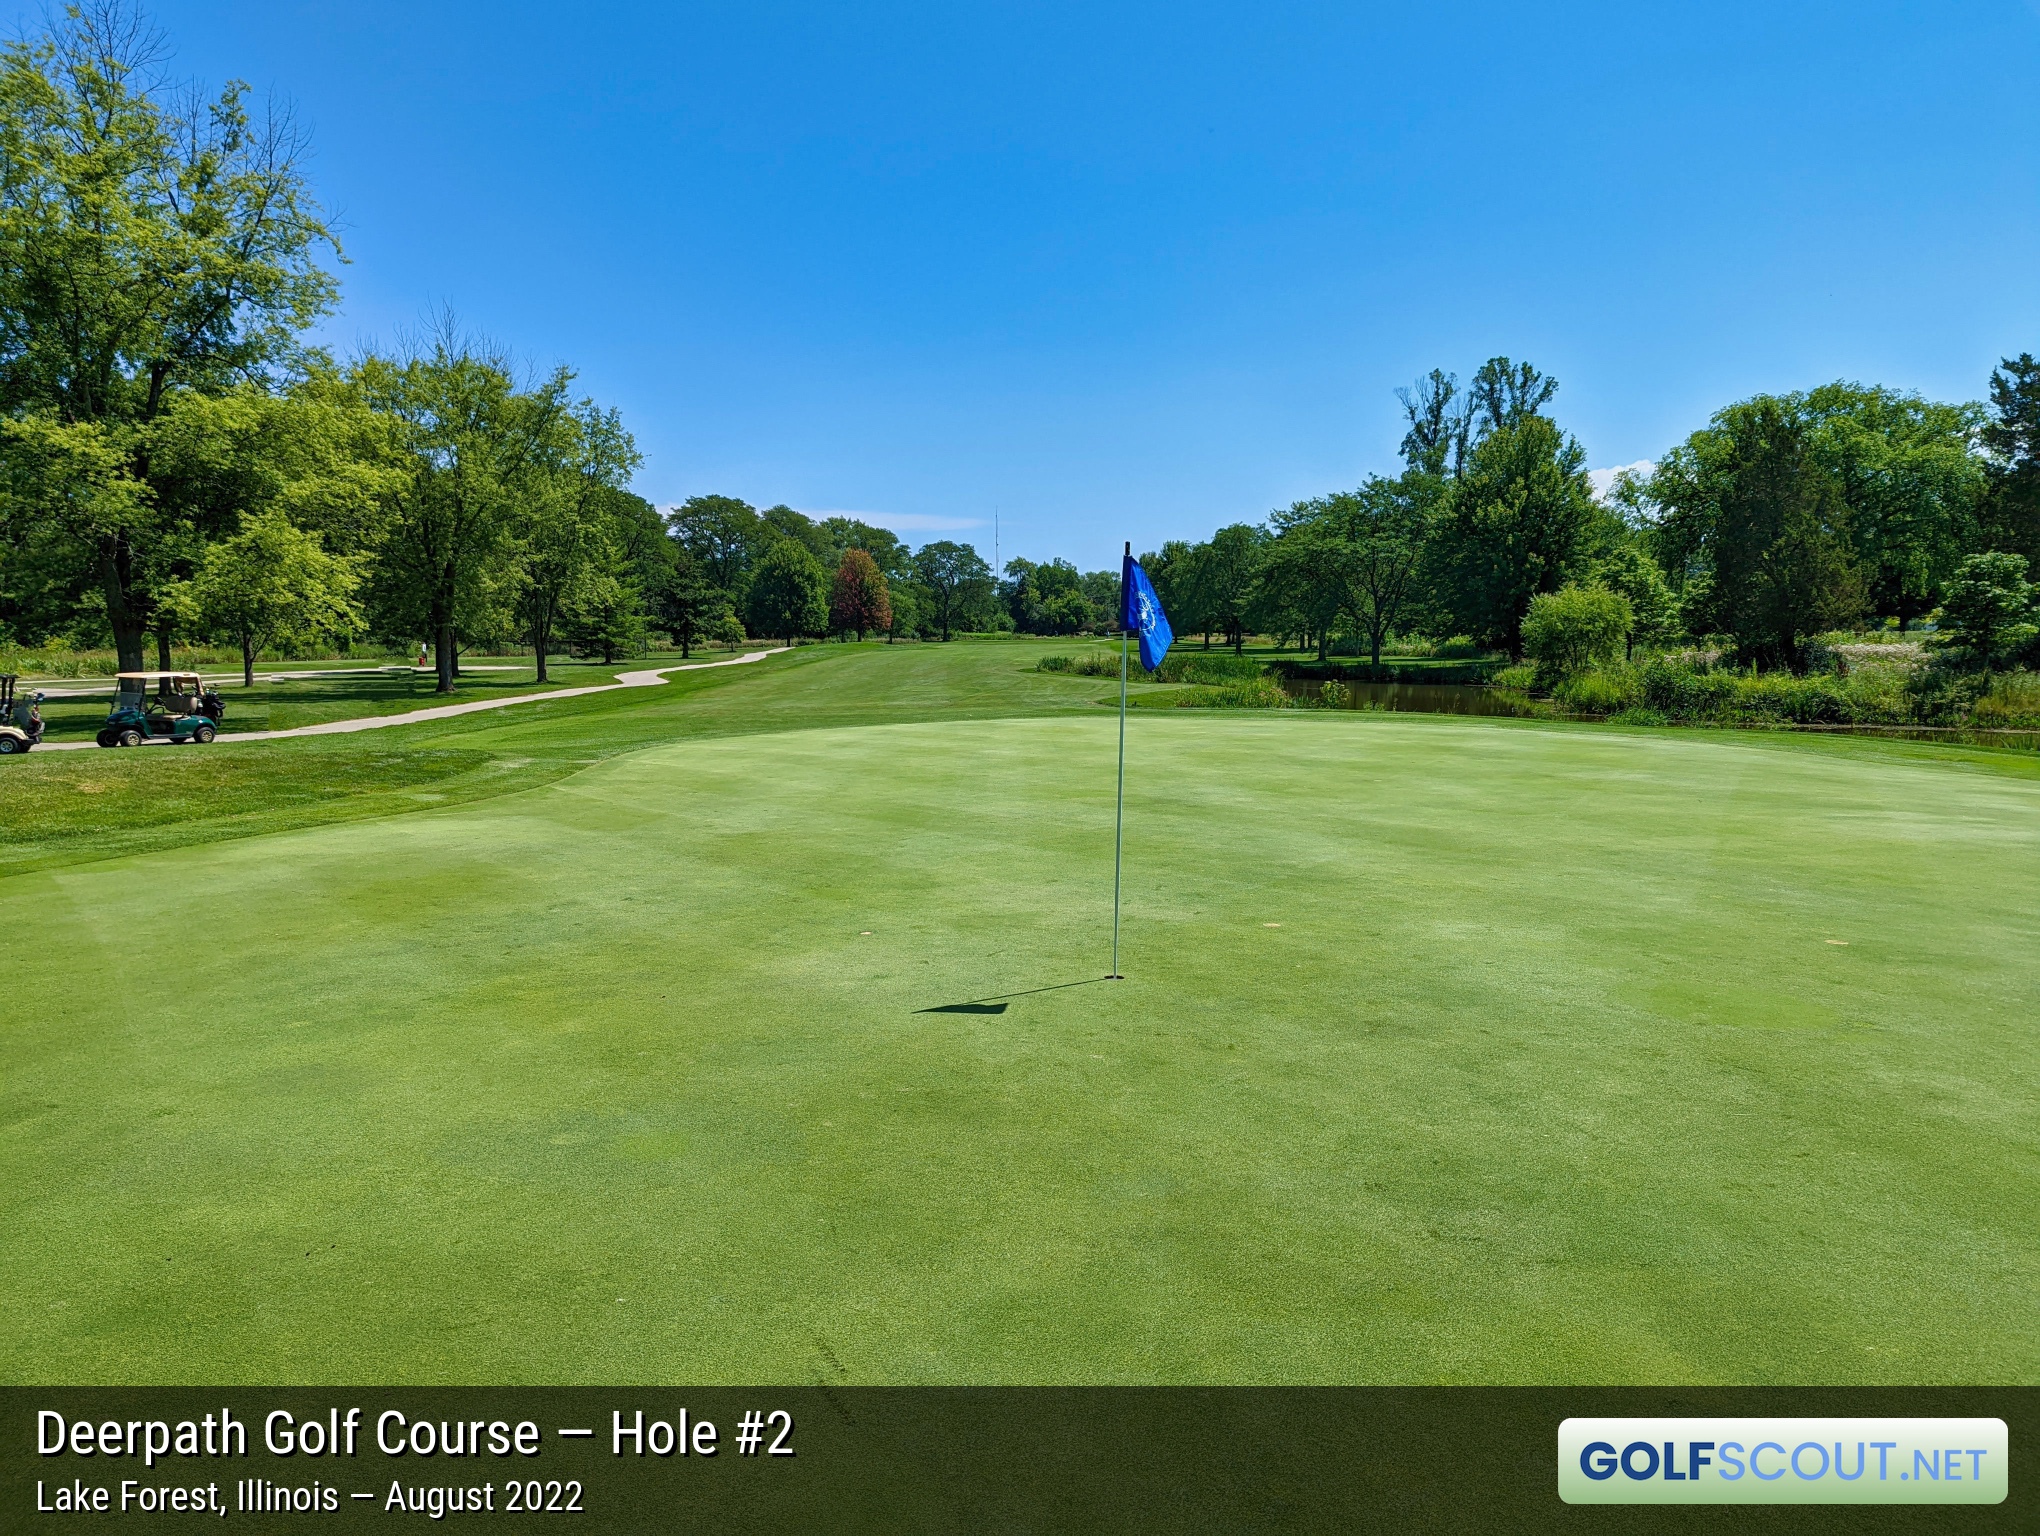 Photo of hole #2 at Deerpath Golf Course in Lake Forest, Illinois. 